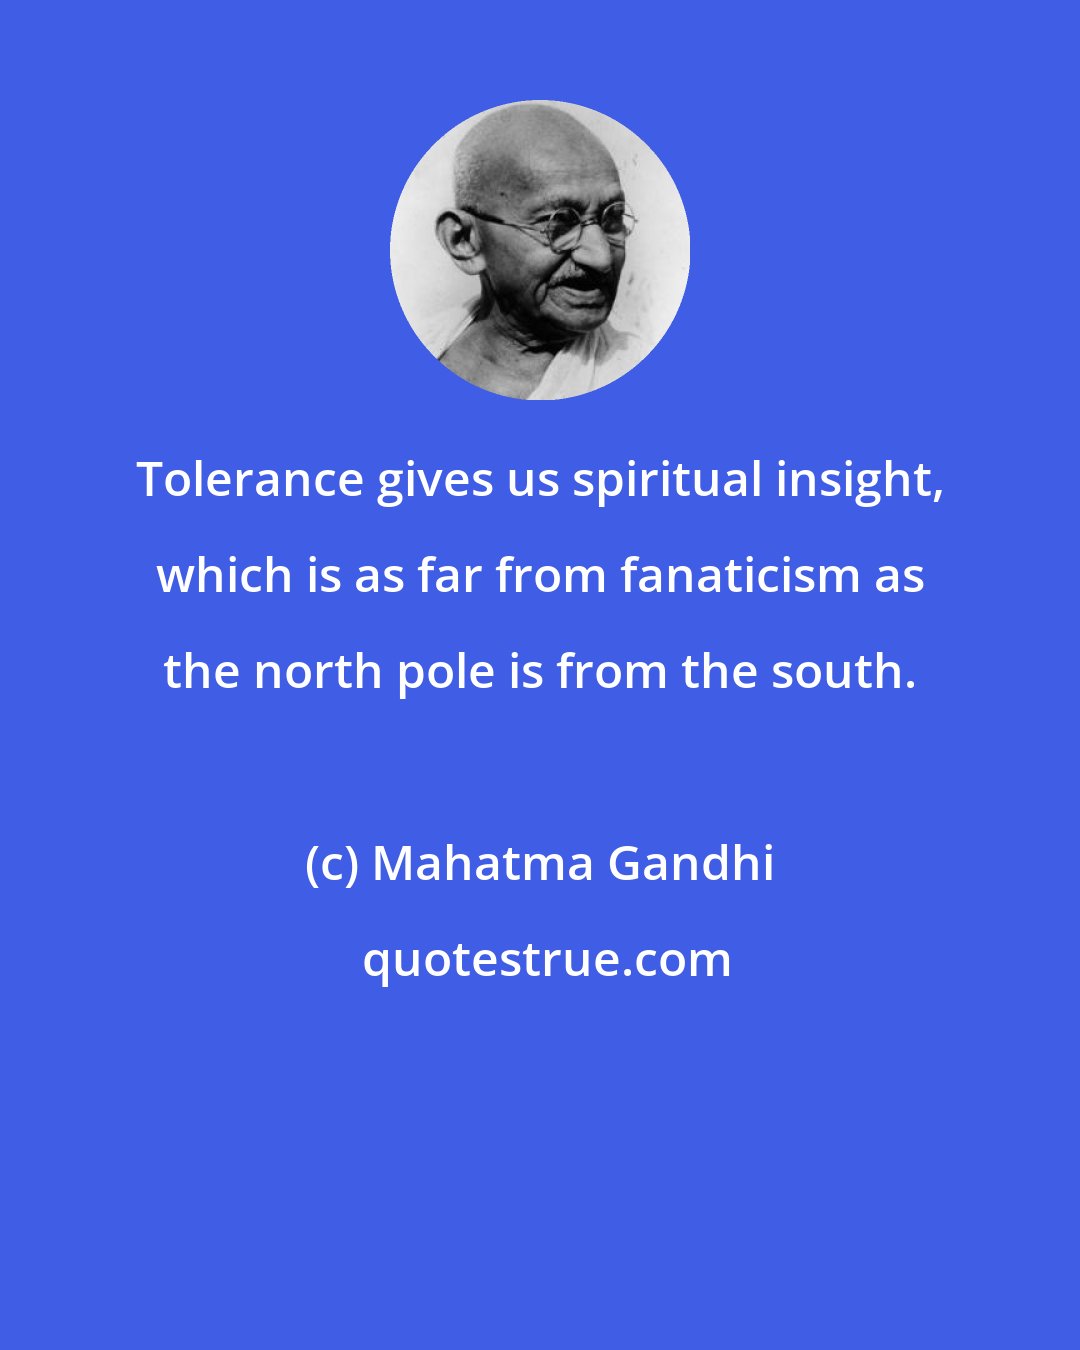 Mahatma Gandhi: Tolerance gives us spiritual insight, which is as far from fanaticism as the north pole is from the south.